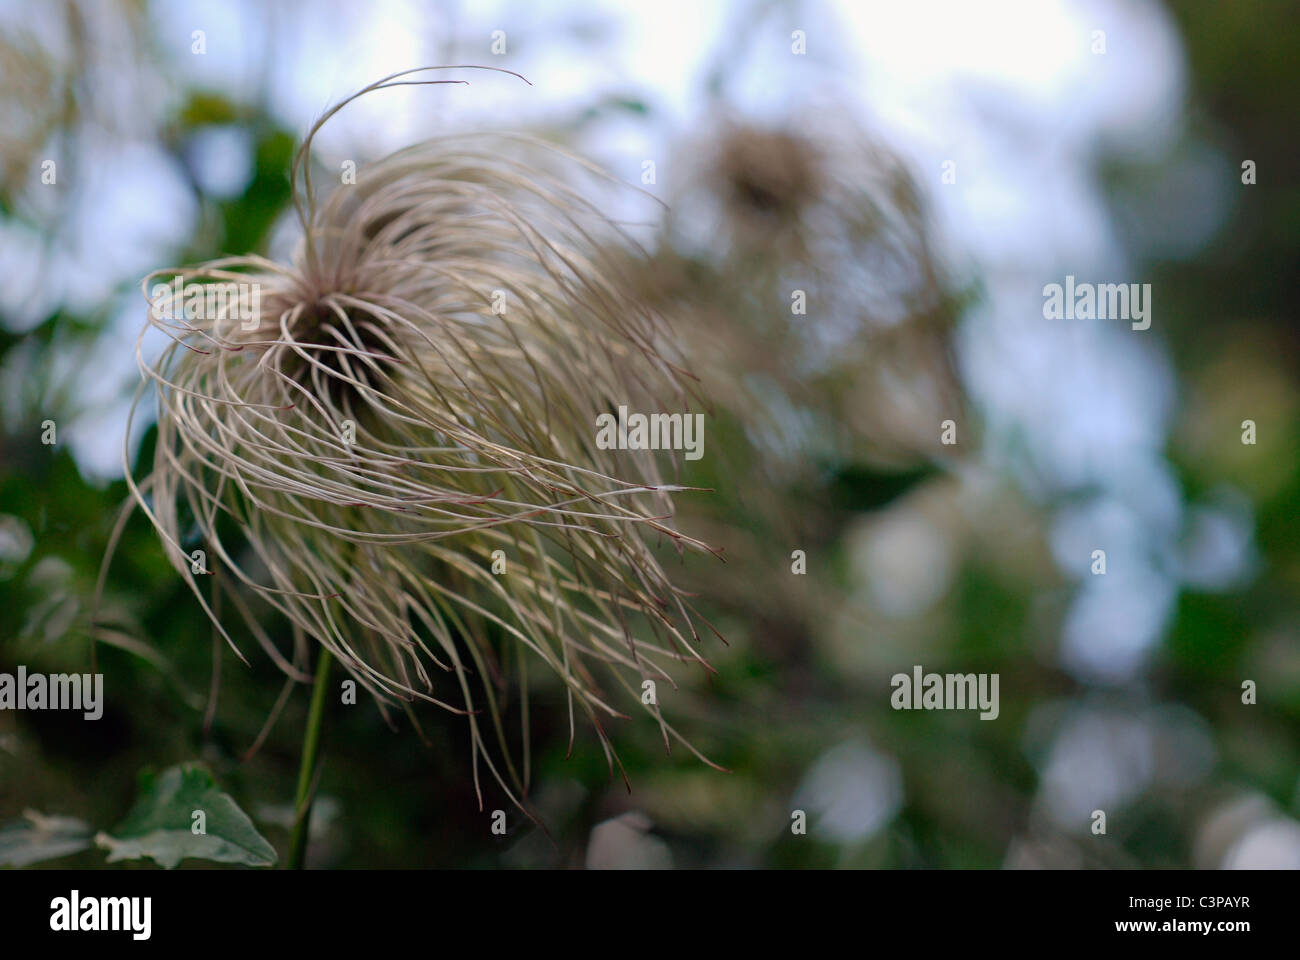 Clematis seed heads Stock Photo